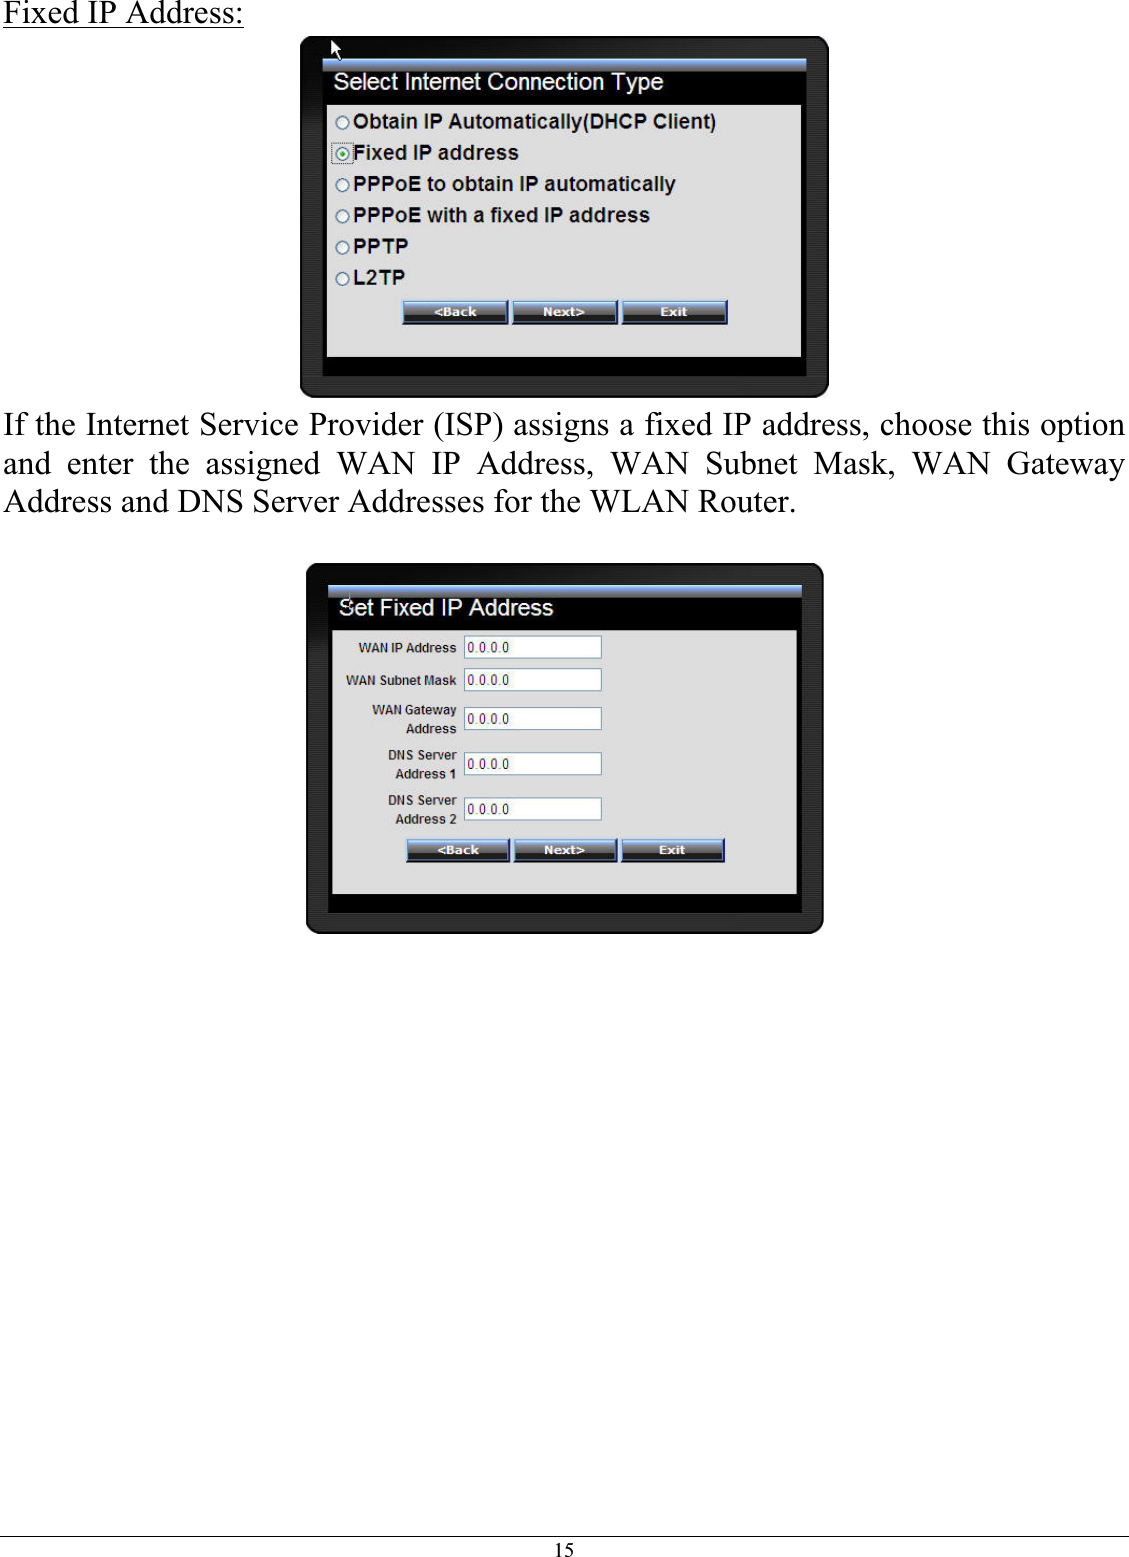 15Fixed IP Address:If the Internet Service Provider (ISP) assigns a fixed IP address, choose this option and enter the assigned WAN IP Address, WAN Subnet Mask, WAN Gateway Address and DNS Server Addresses for the WLAN Router. 